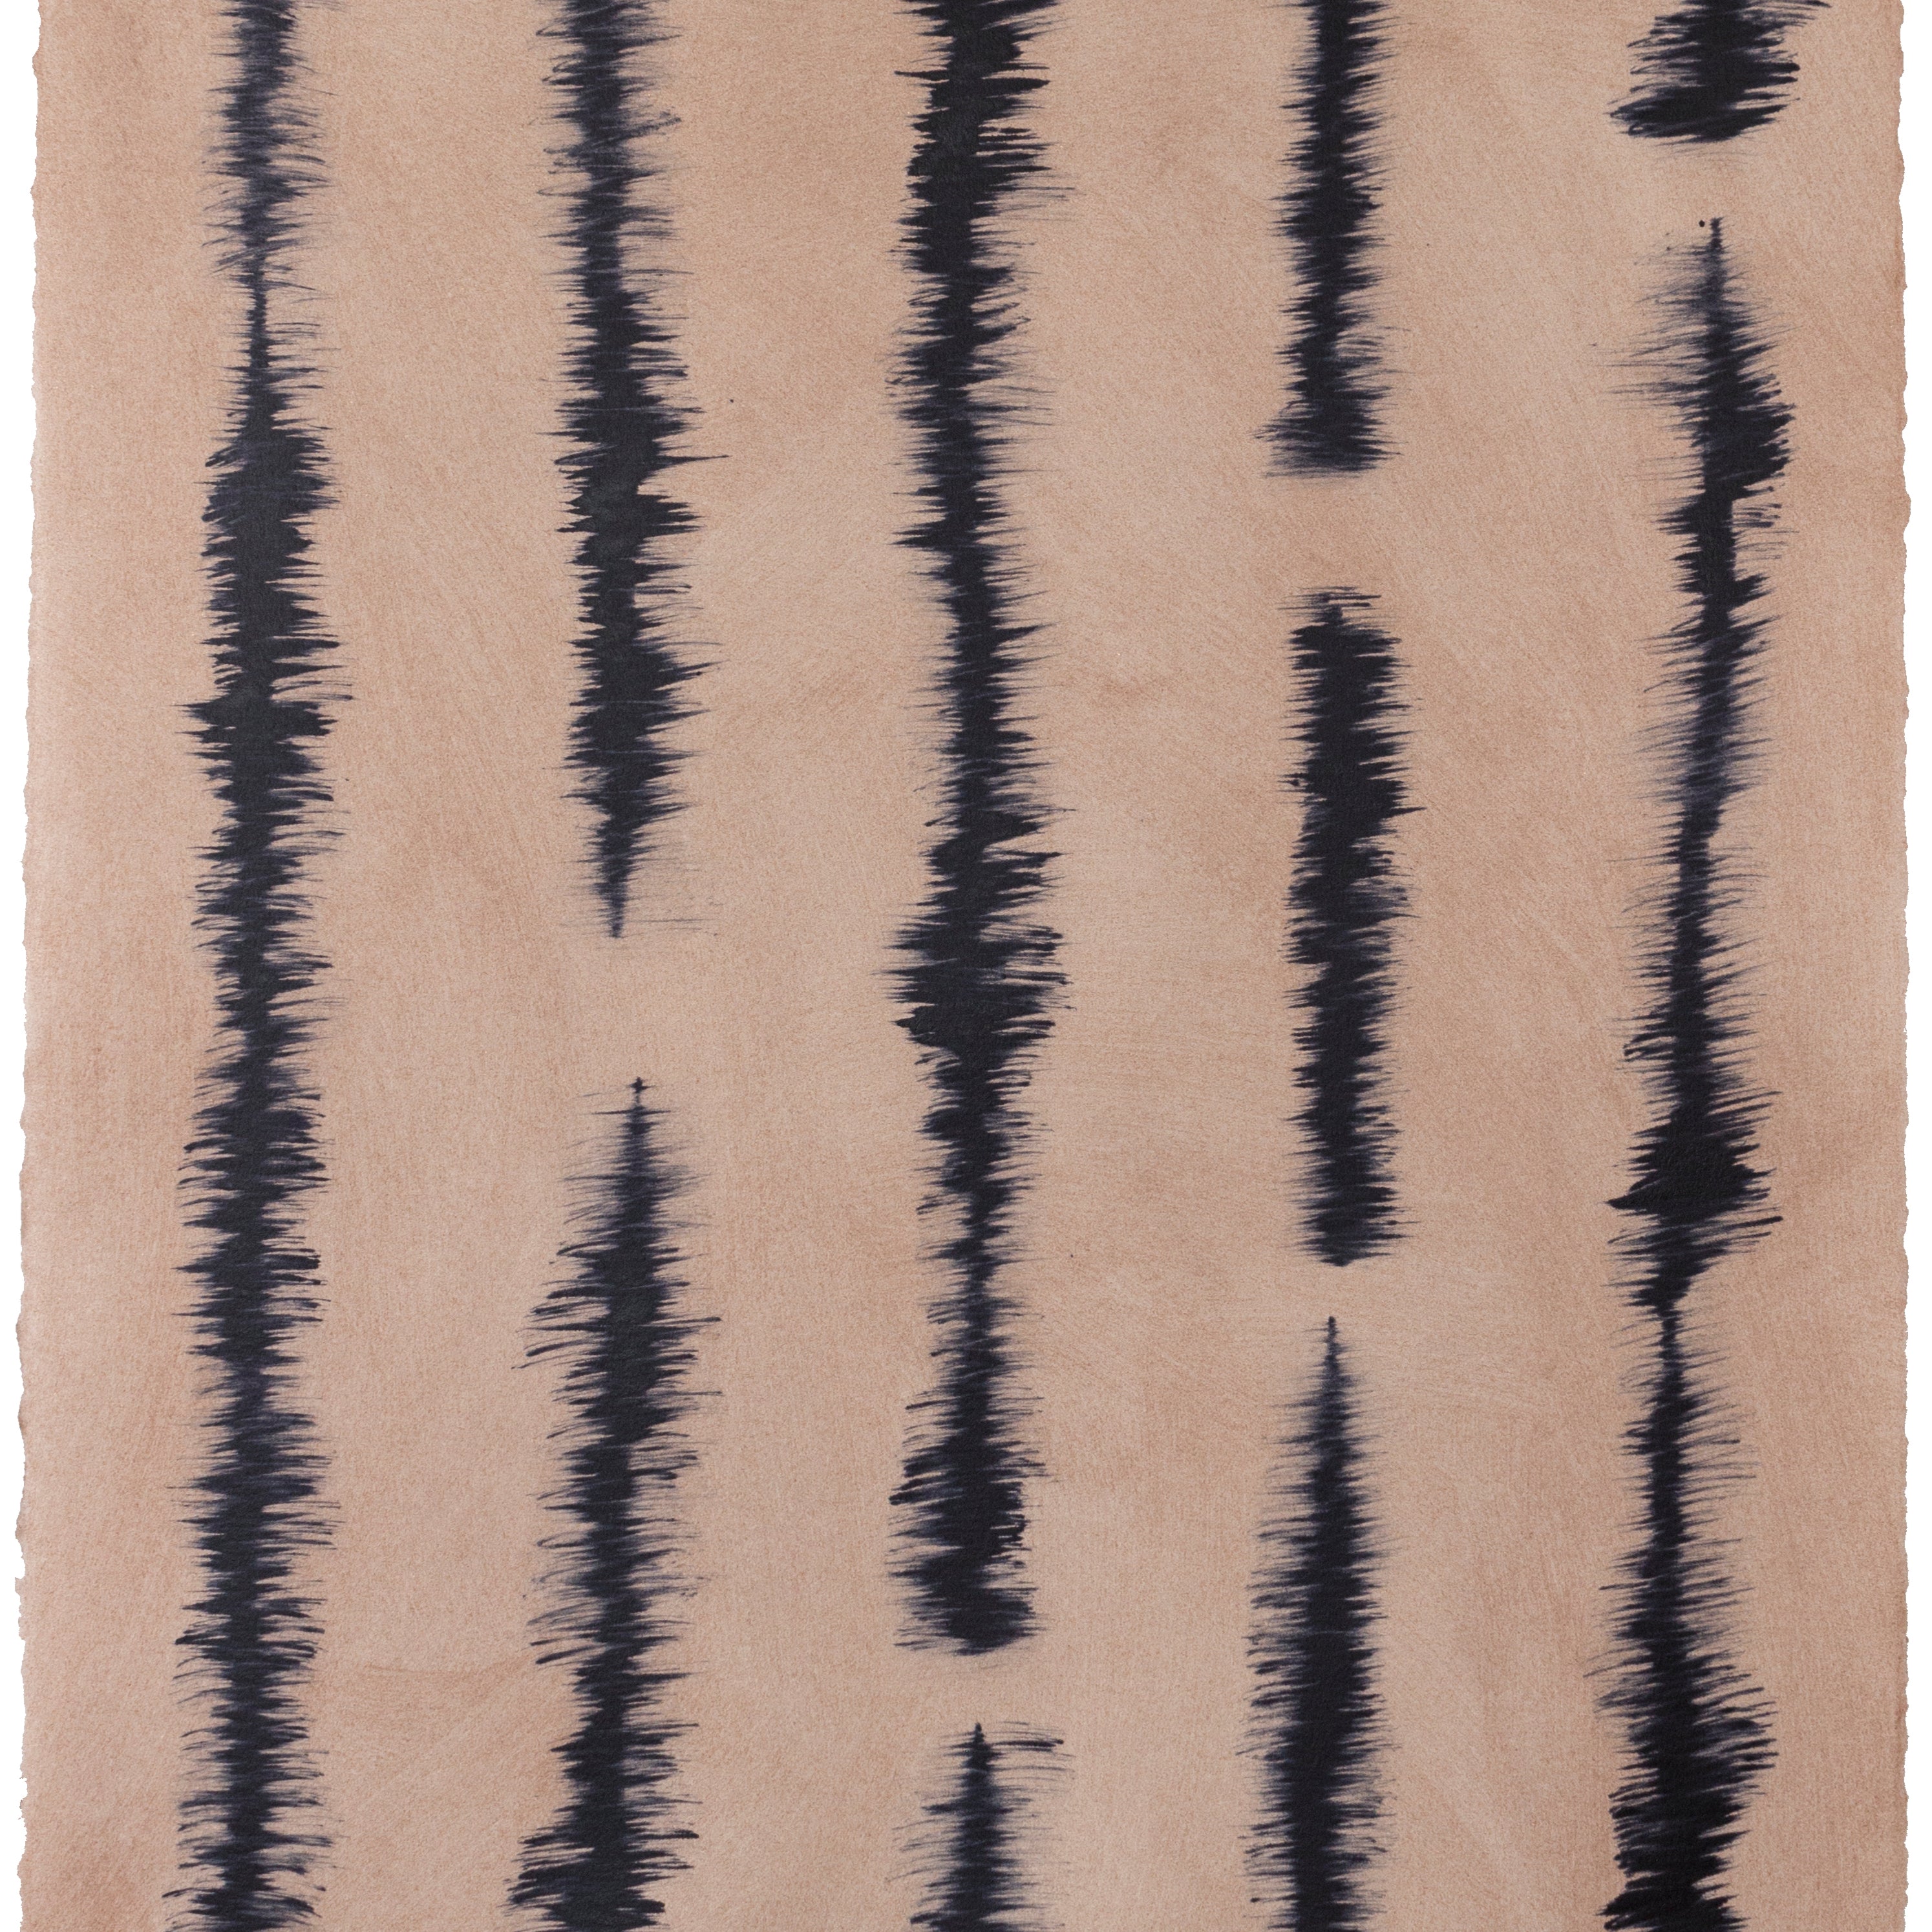 Sheet of hand-painted wallpaper with an irregular vibrating linear pattern in navy on a tan field.